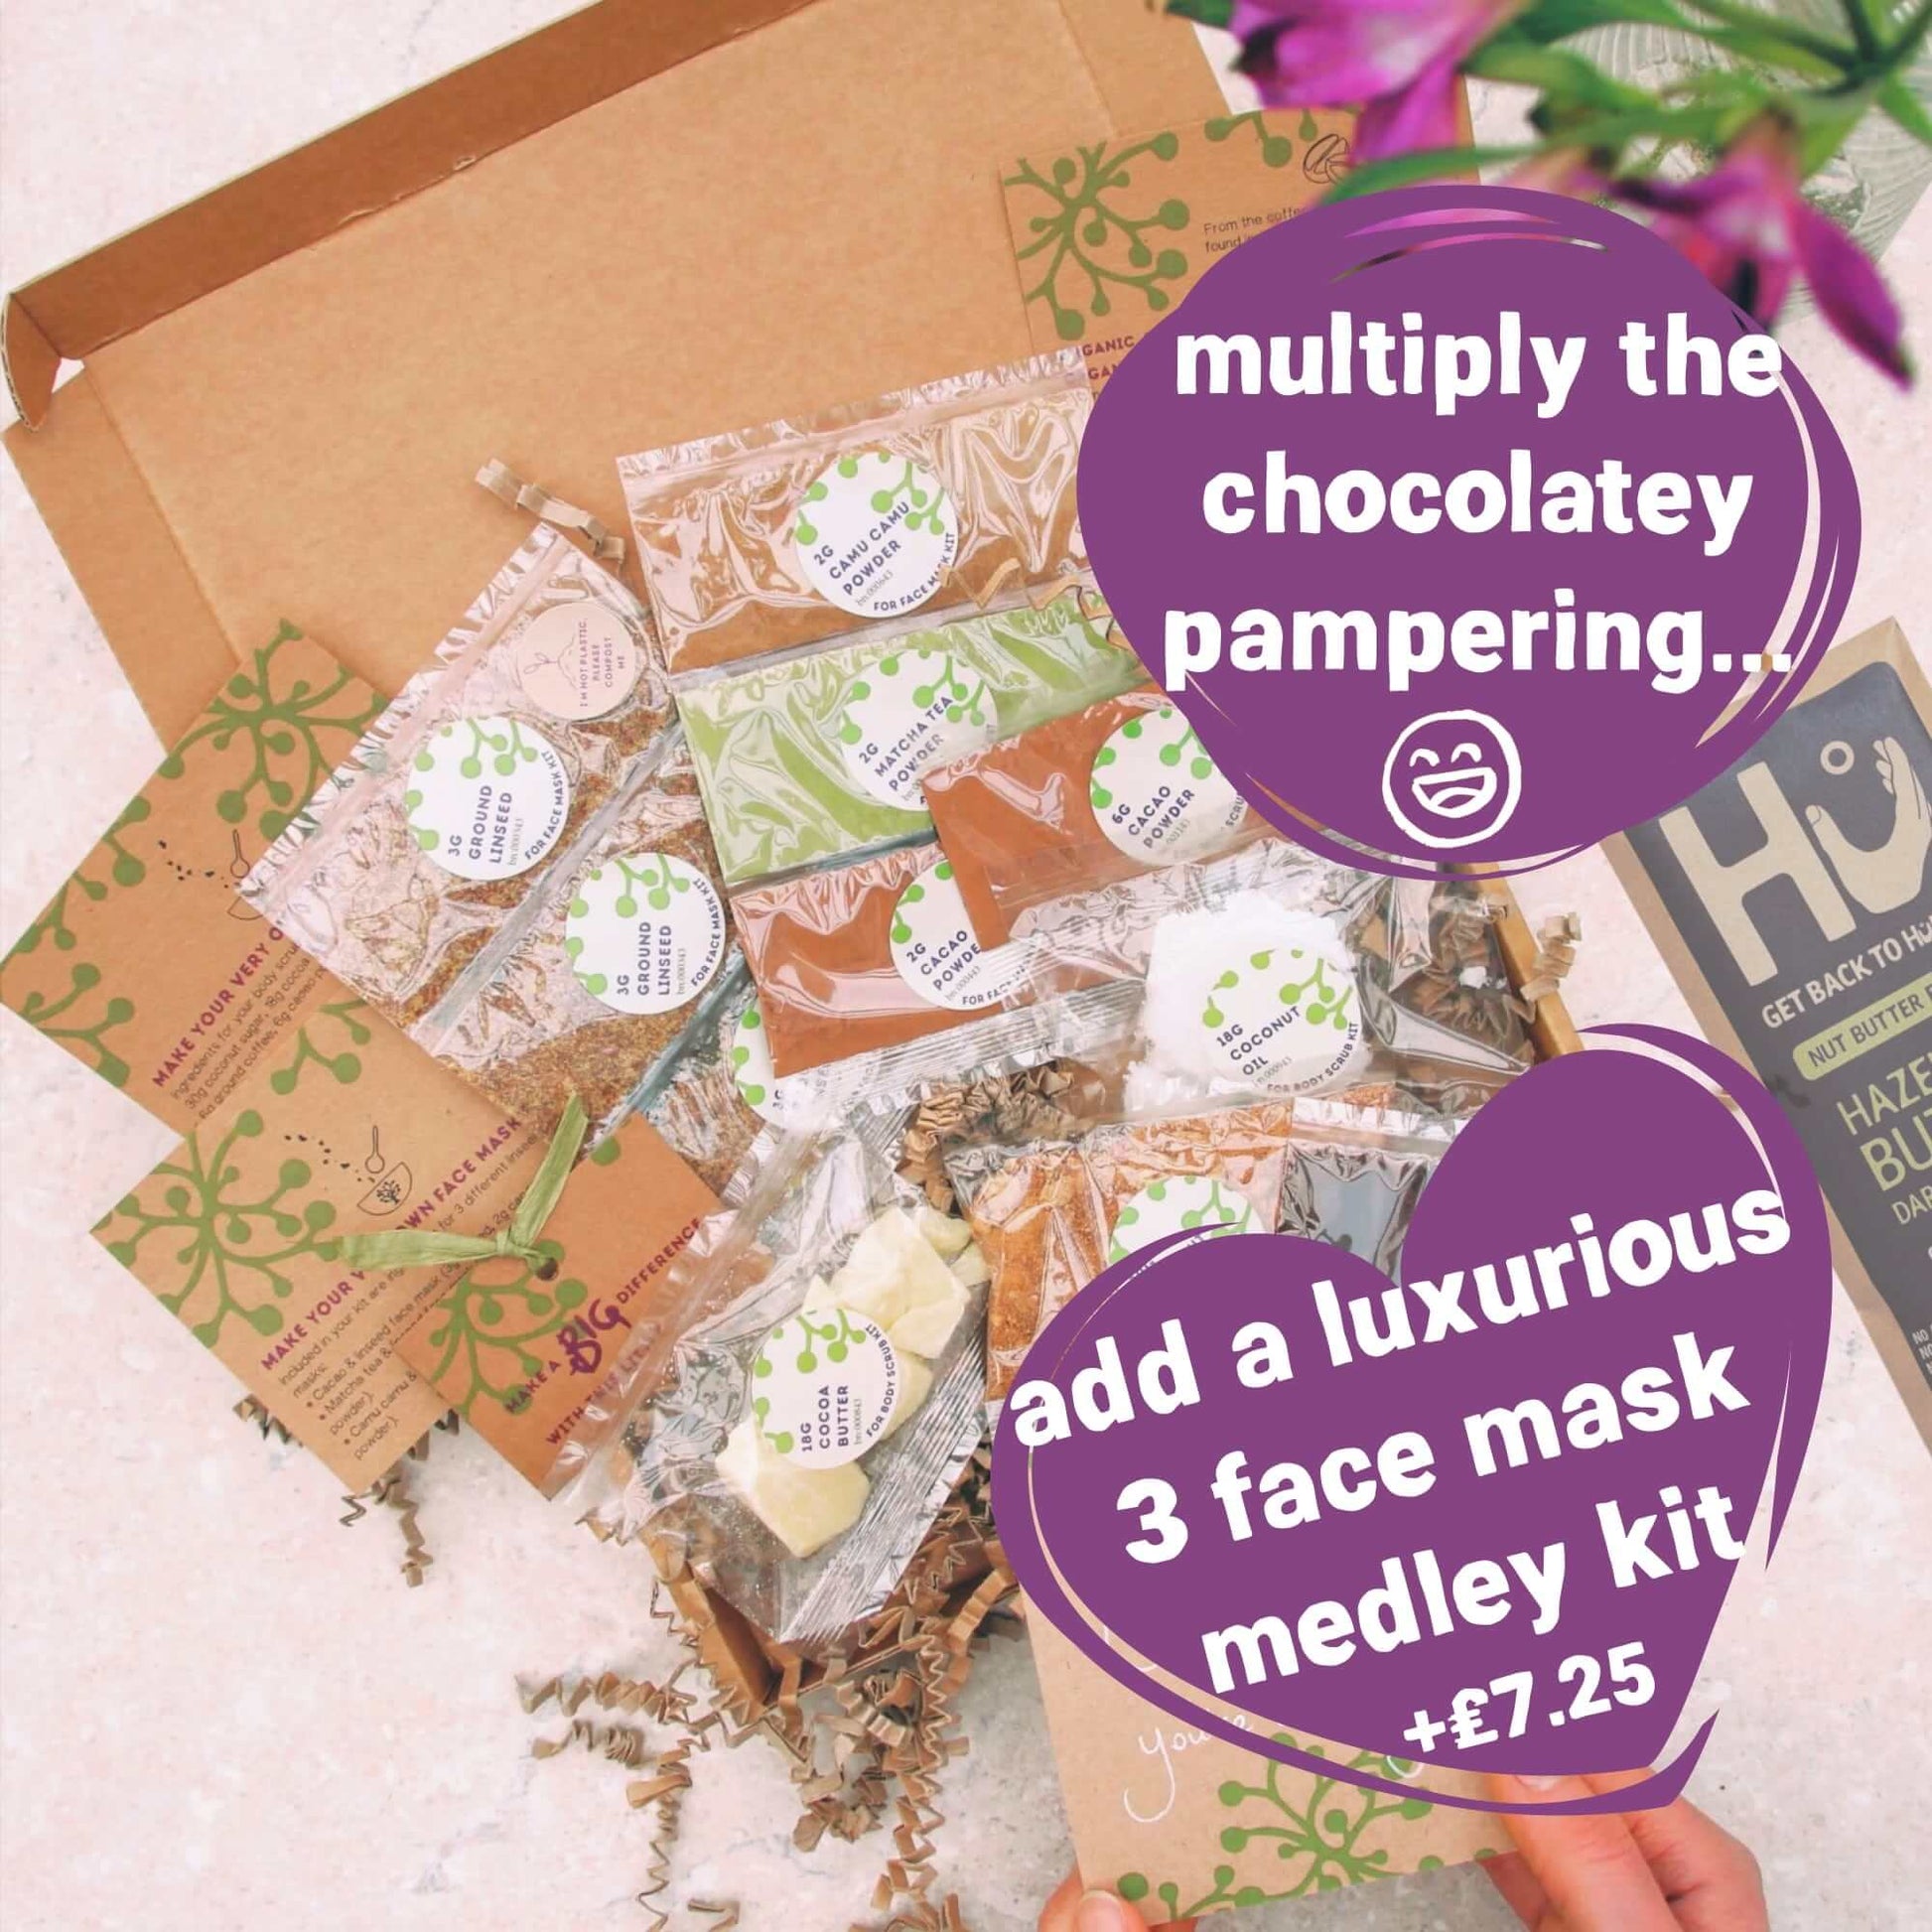 add 3 organic face mask kits to proud of you letterbox gift